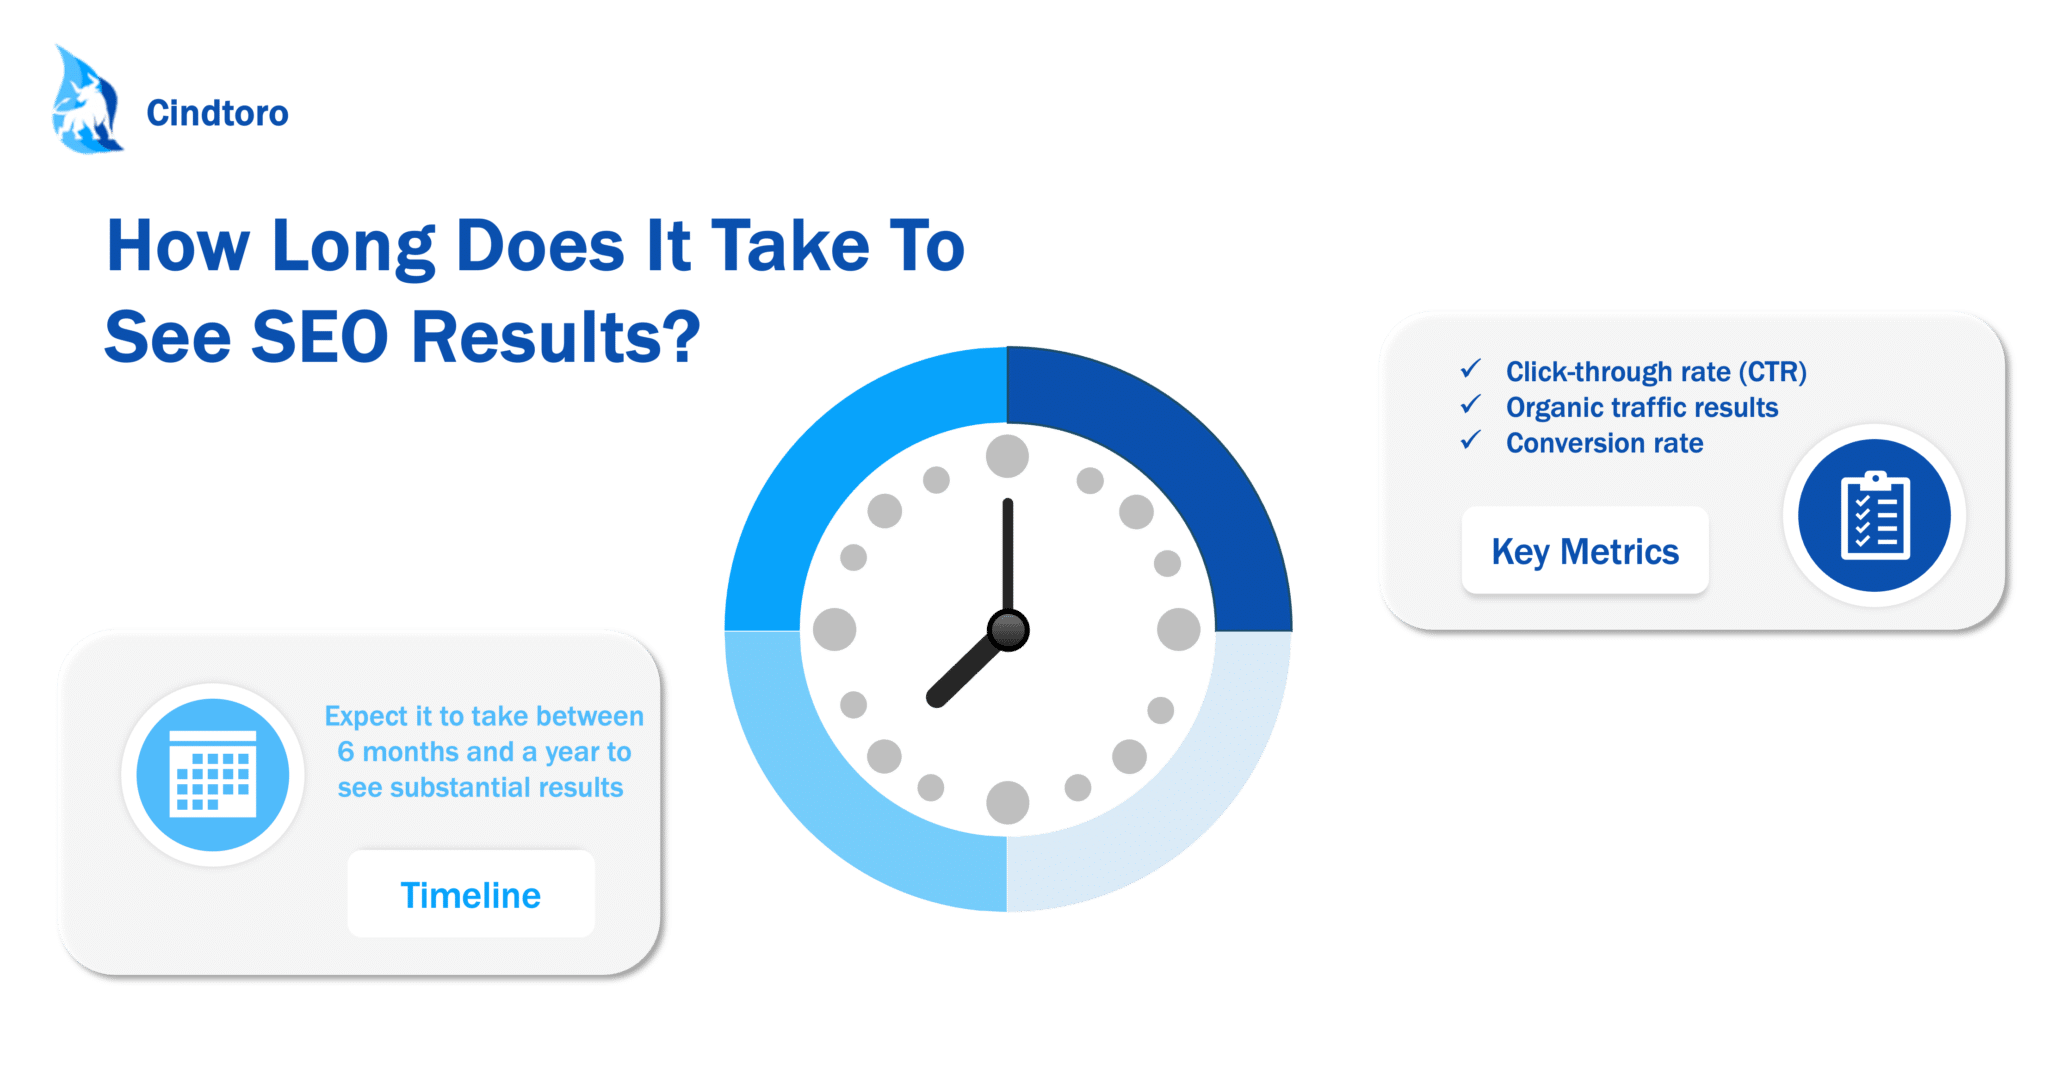 How Long Does It Take To See SEO Results?